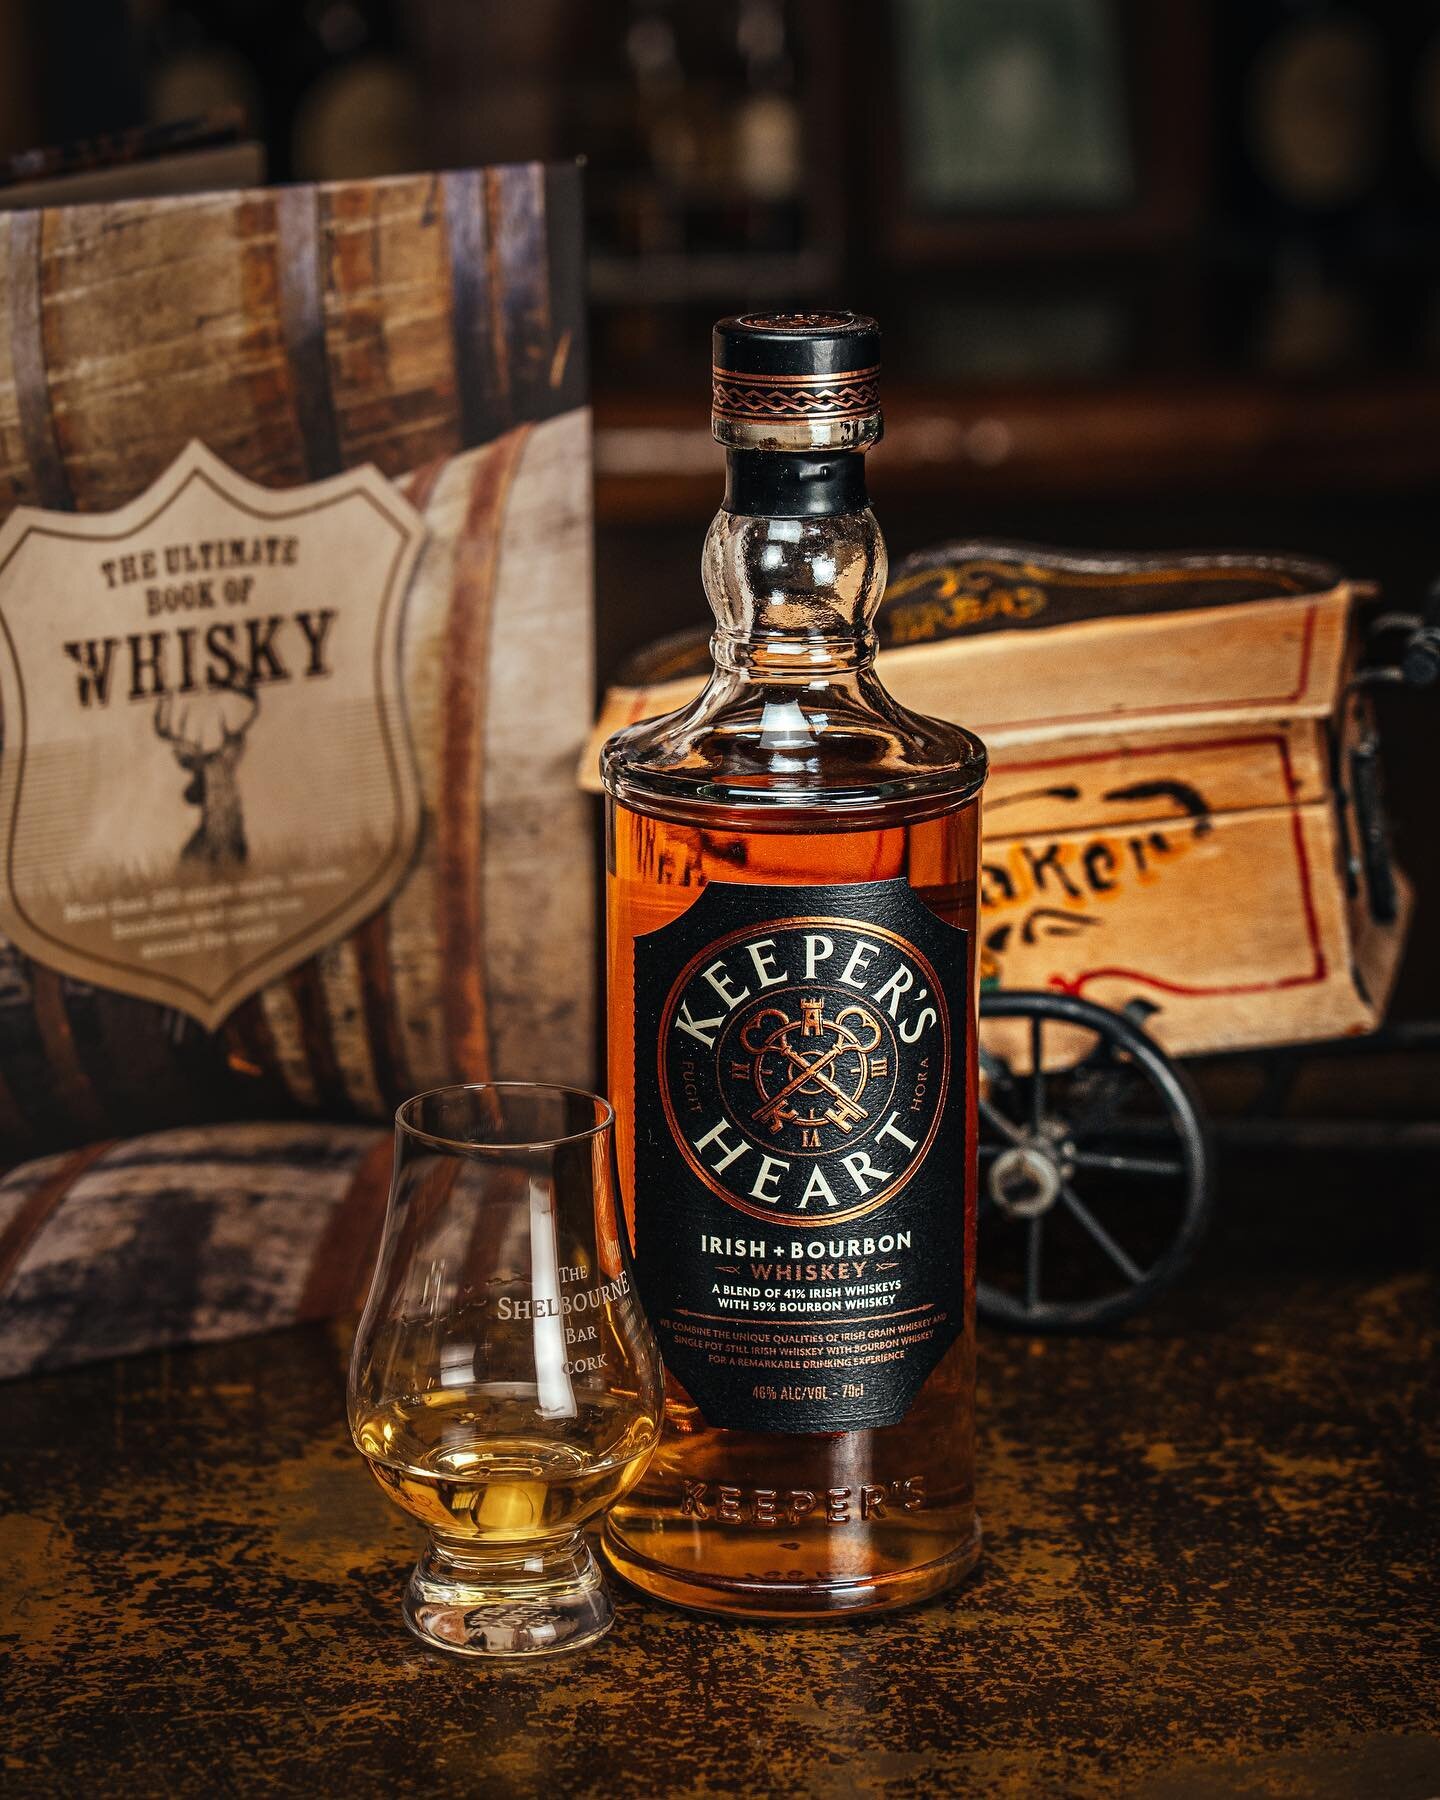 The characteristic sweet taste of bourbon intertwined with notes of freshly charred virgin oak 🥃

The Keeper&rsquo;s Heart Irish + Bourbon is our new Whiskey of the Week.

Pop in the Shelbourne Bar and try it, only this week, for &euro;5.50.

#shelb